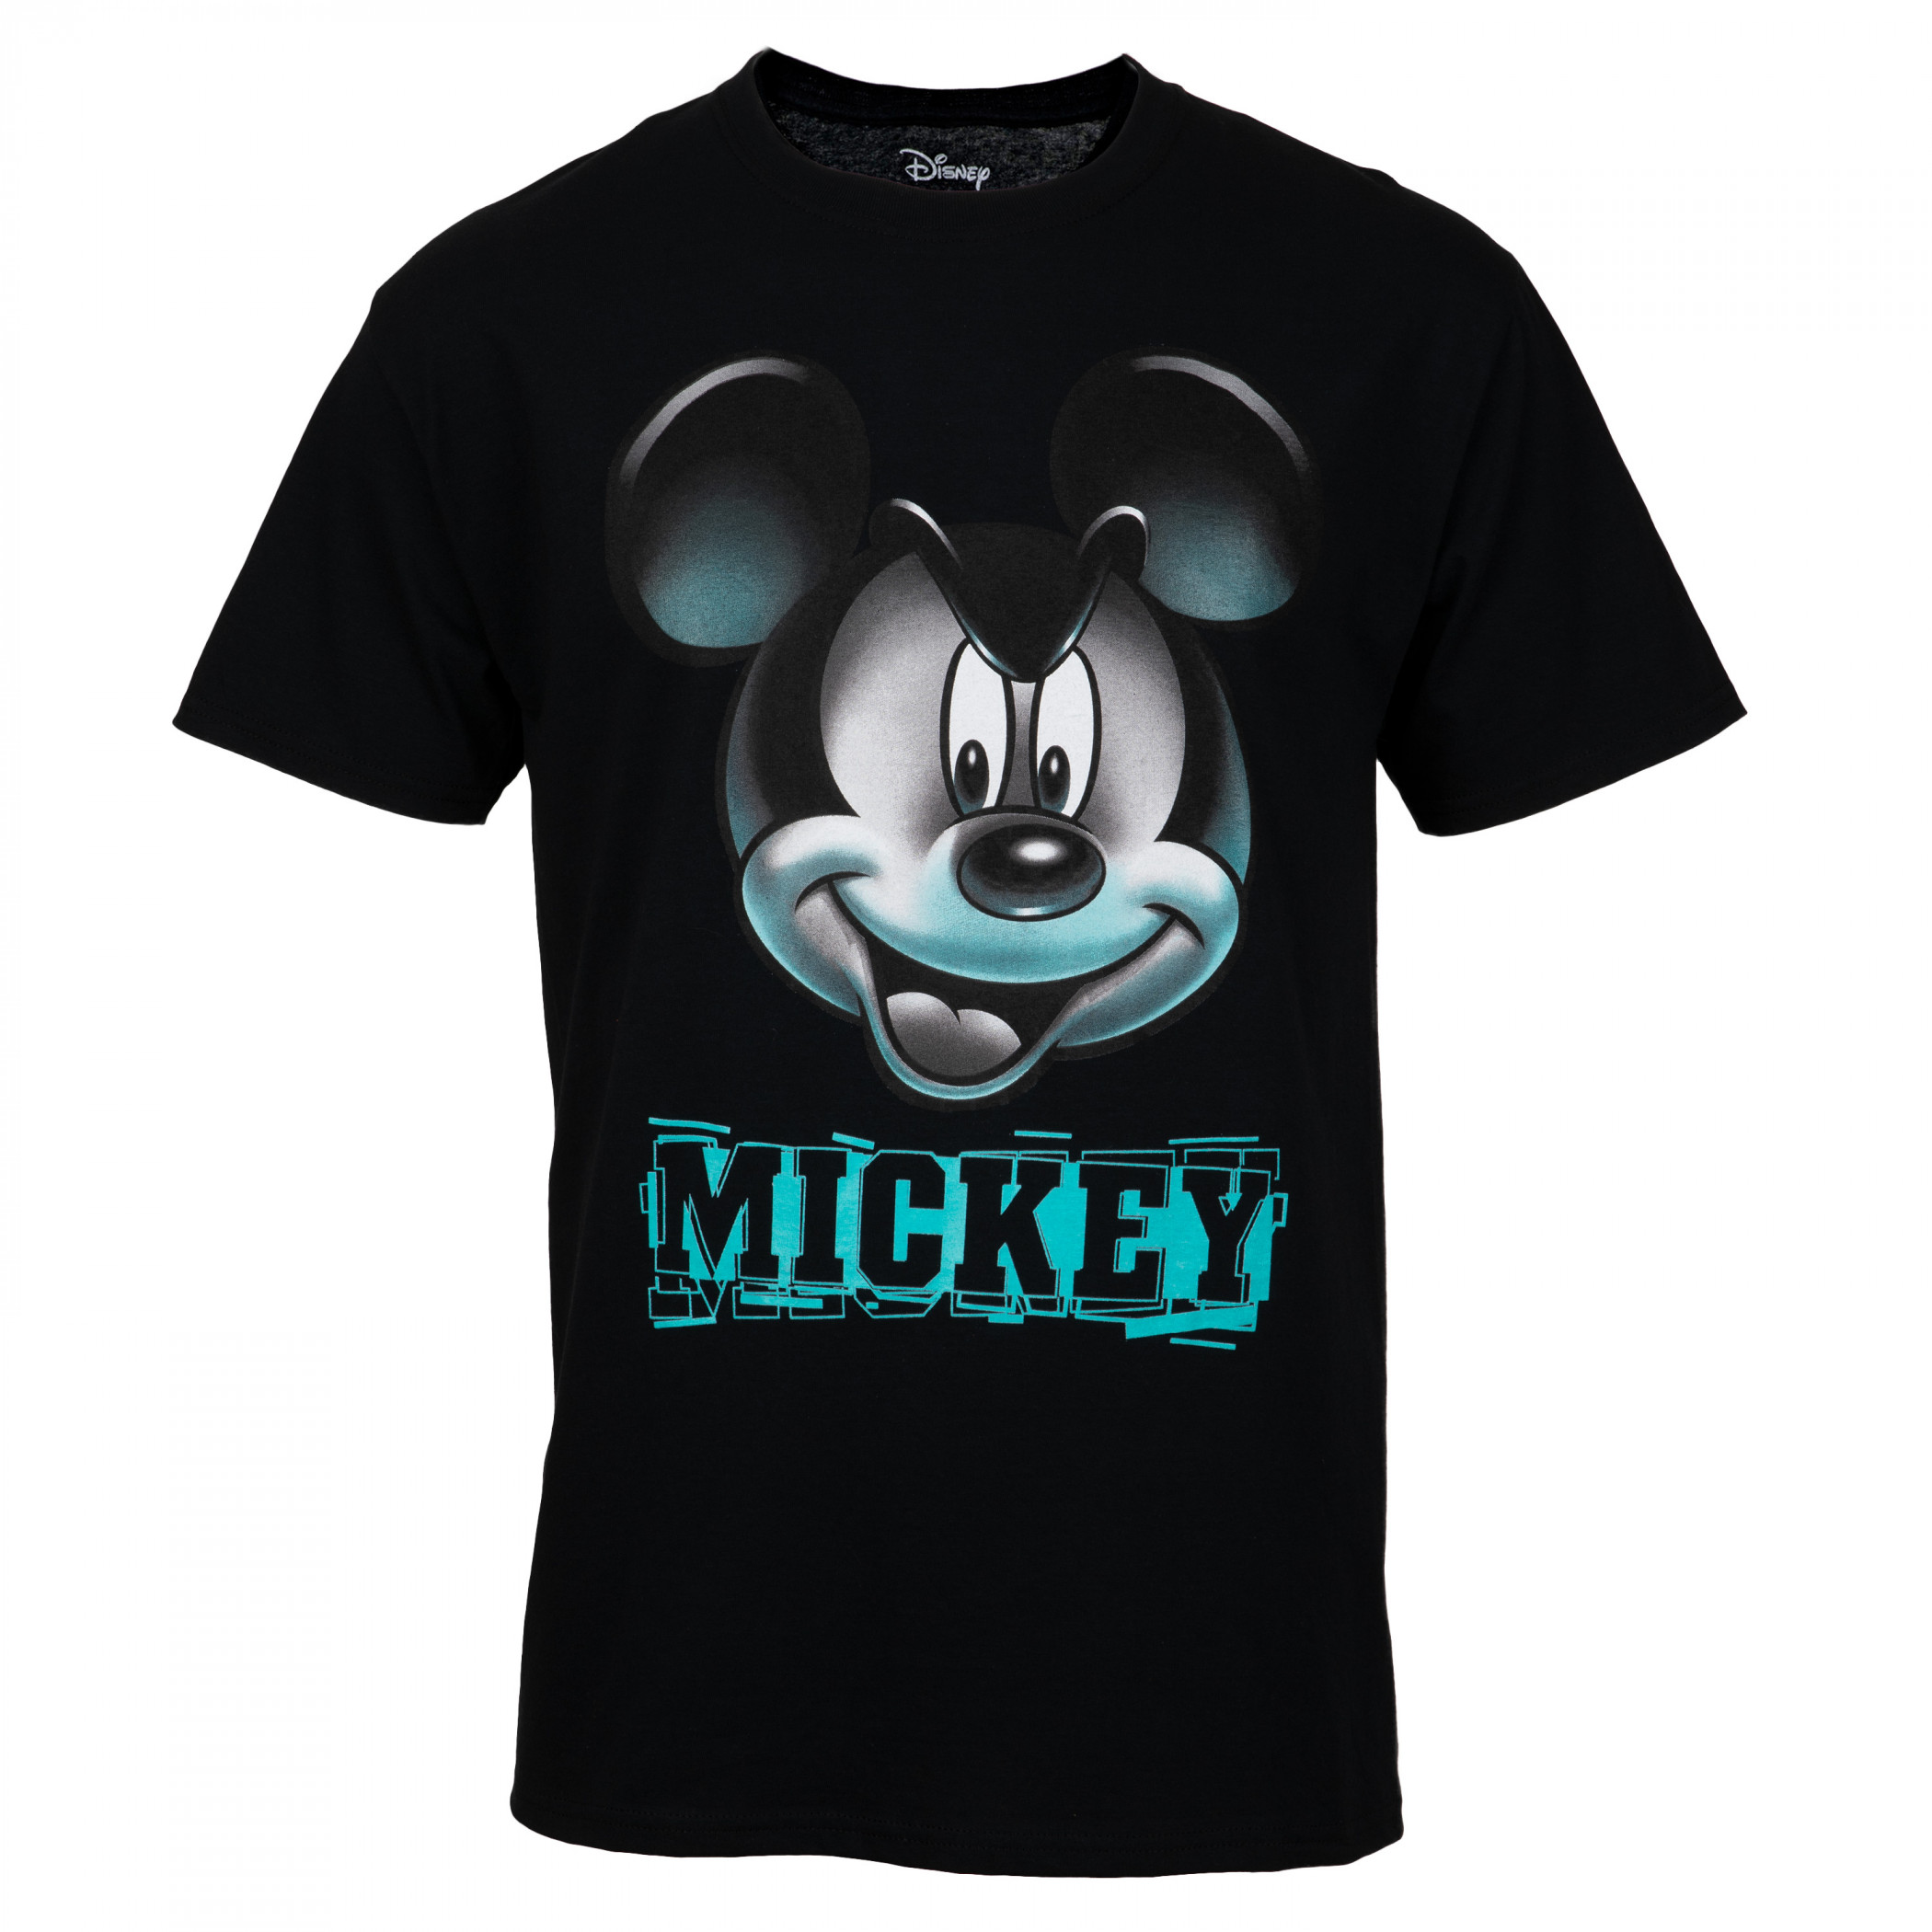 Disney Micky Mouse Epic Glow in the Dark T-Shirt